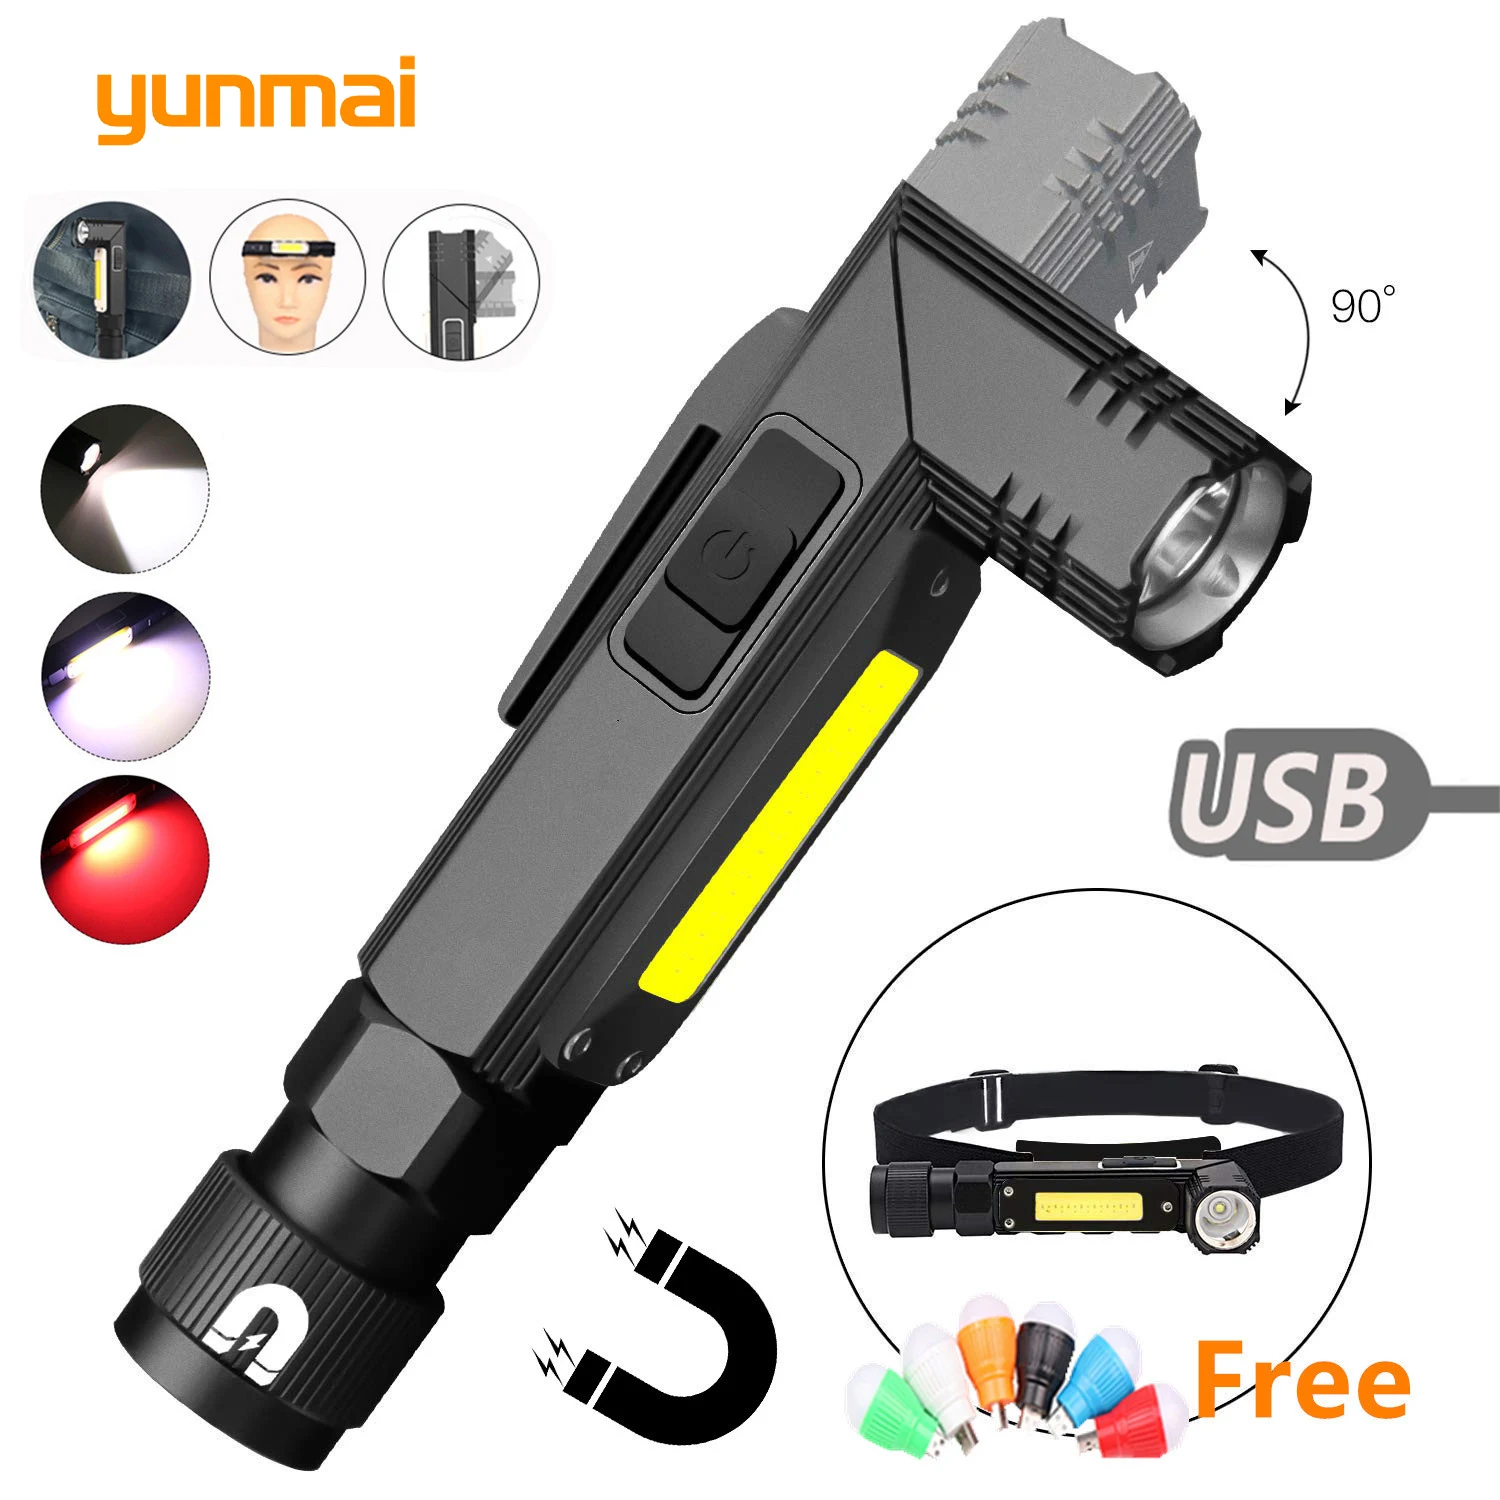 

Flashlight Bright Handfree Rechargeable Super Torch Outdoor Rotary 90 Modes Clip 5 Degree Dual Tactical Twist Fuel